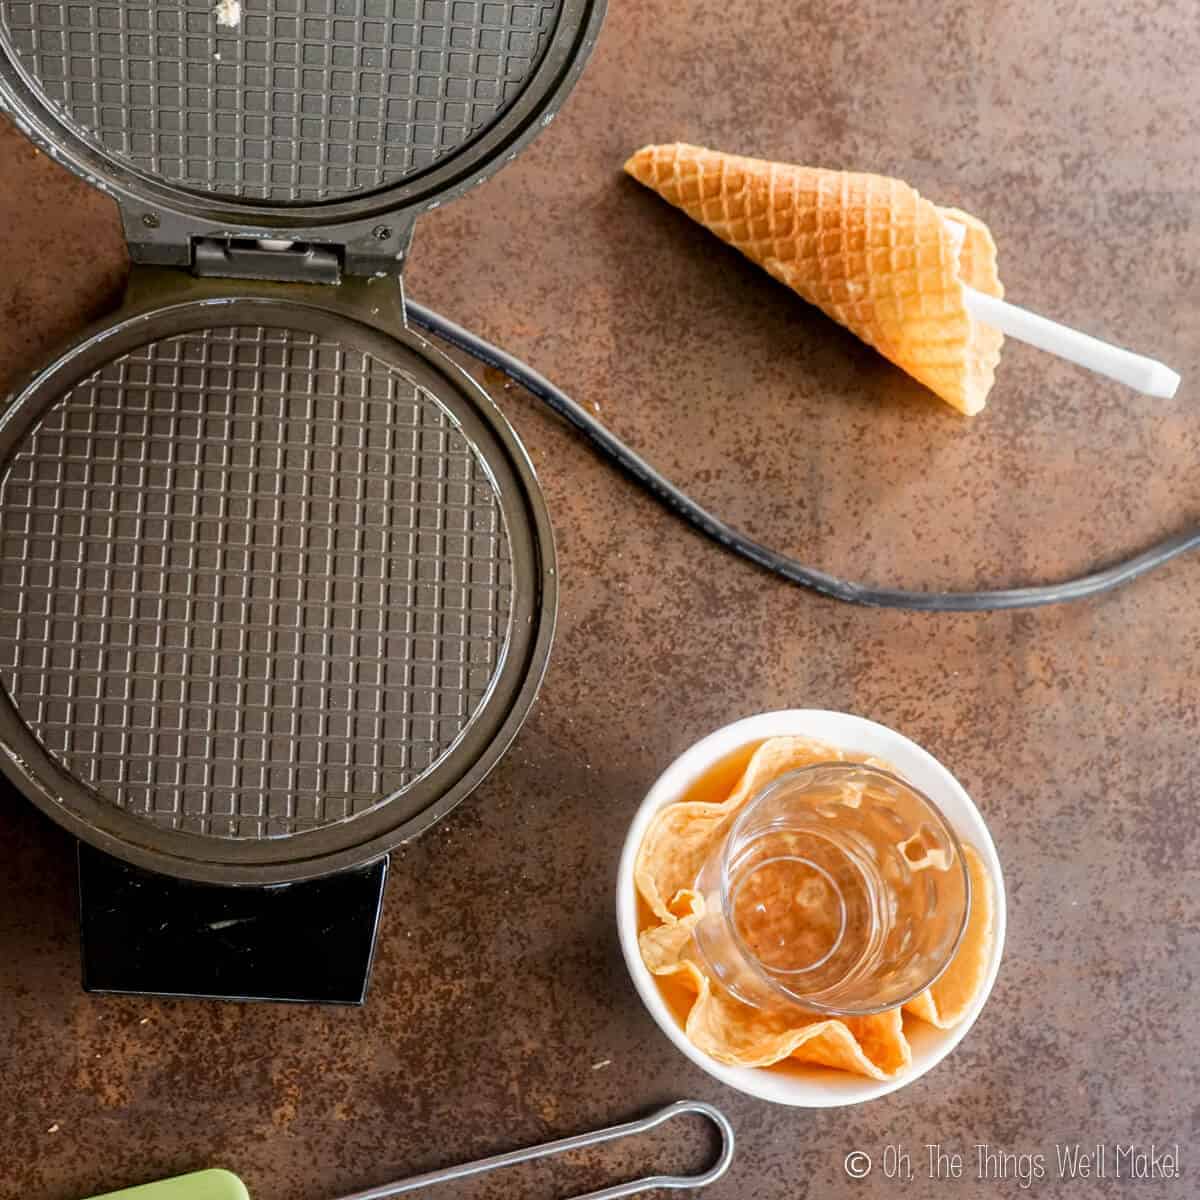 Overhead view of an open waffle cone iron, next to a homemade waffle cone and waffle bowl